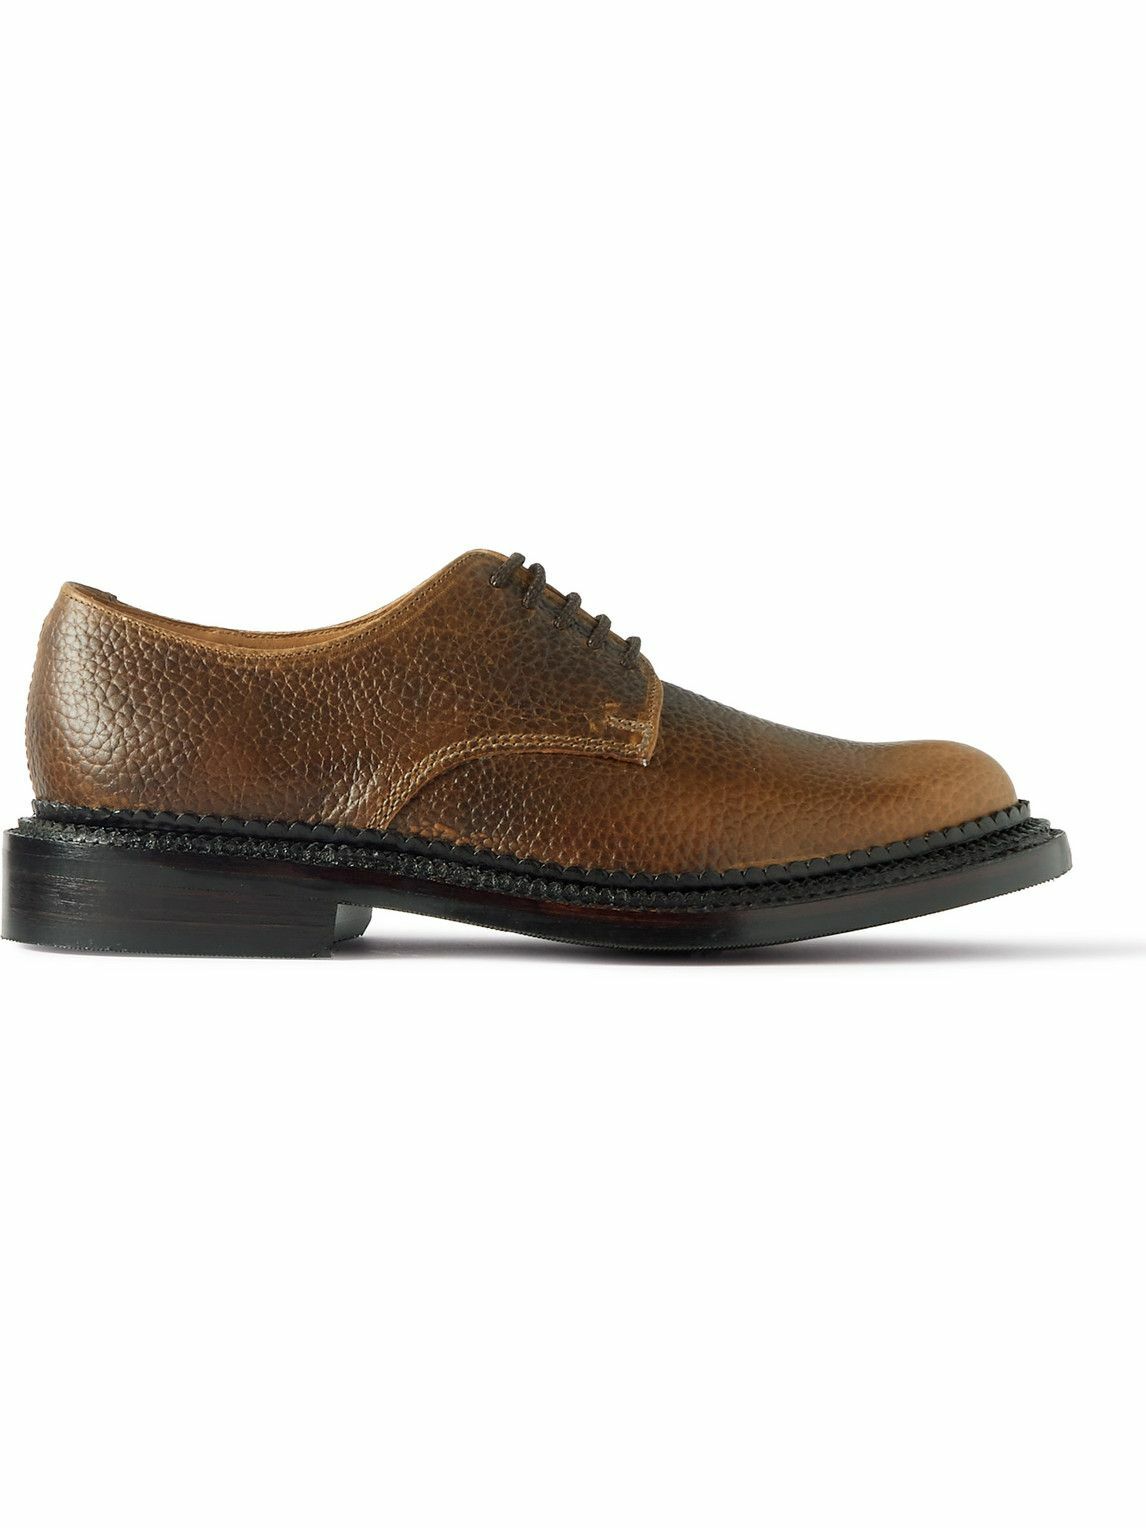 Photo: Grenson - Curt Full-Grain Leather Derby Shoes - Brown